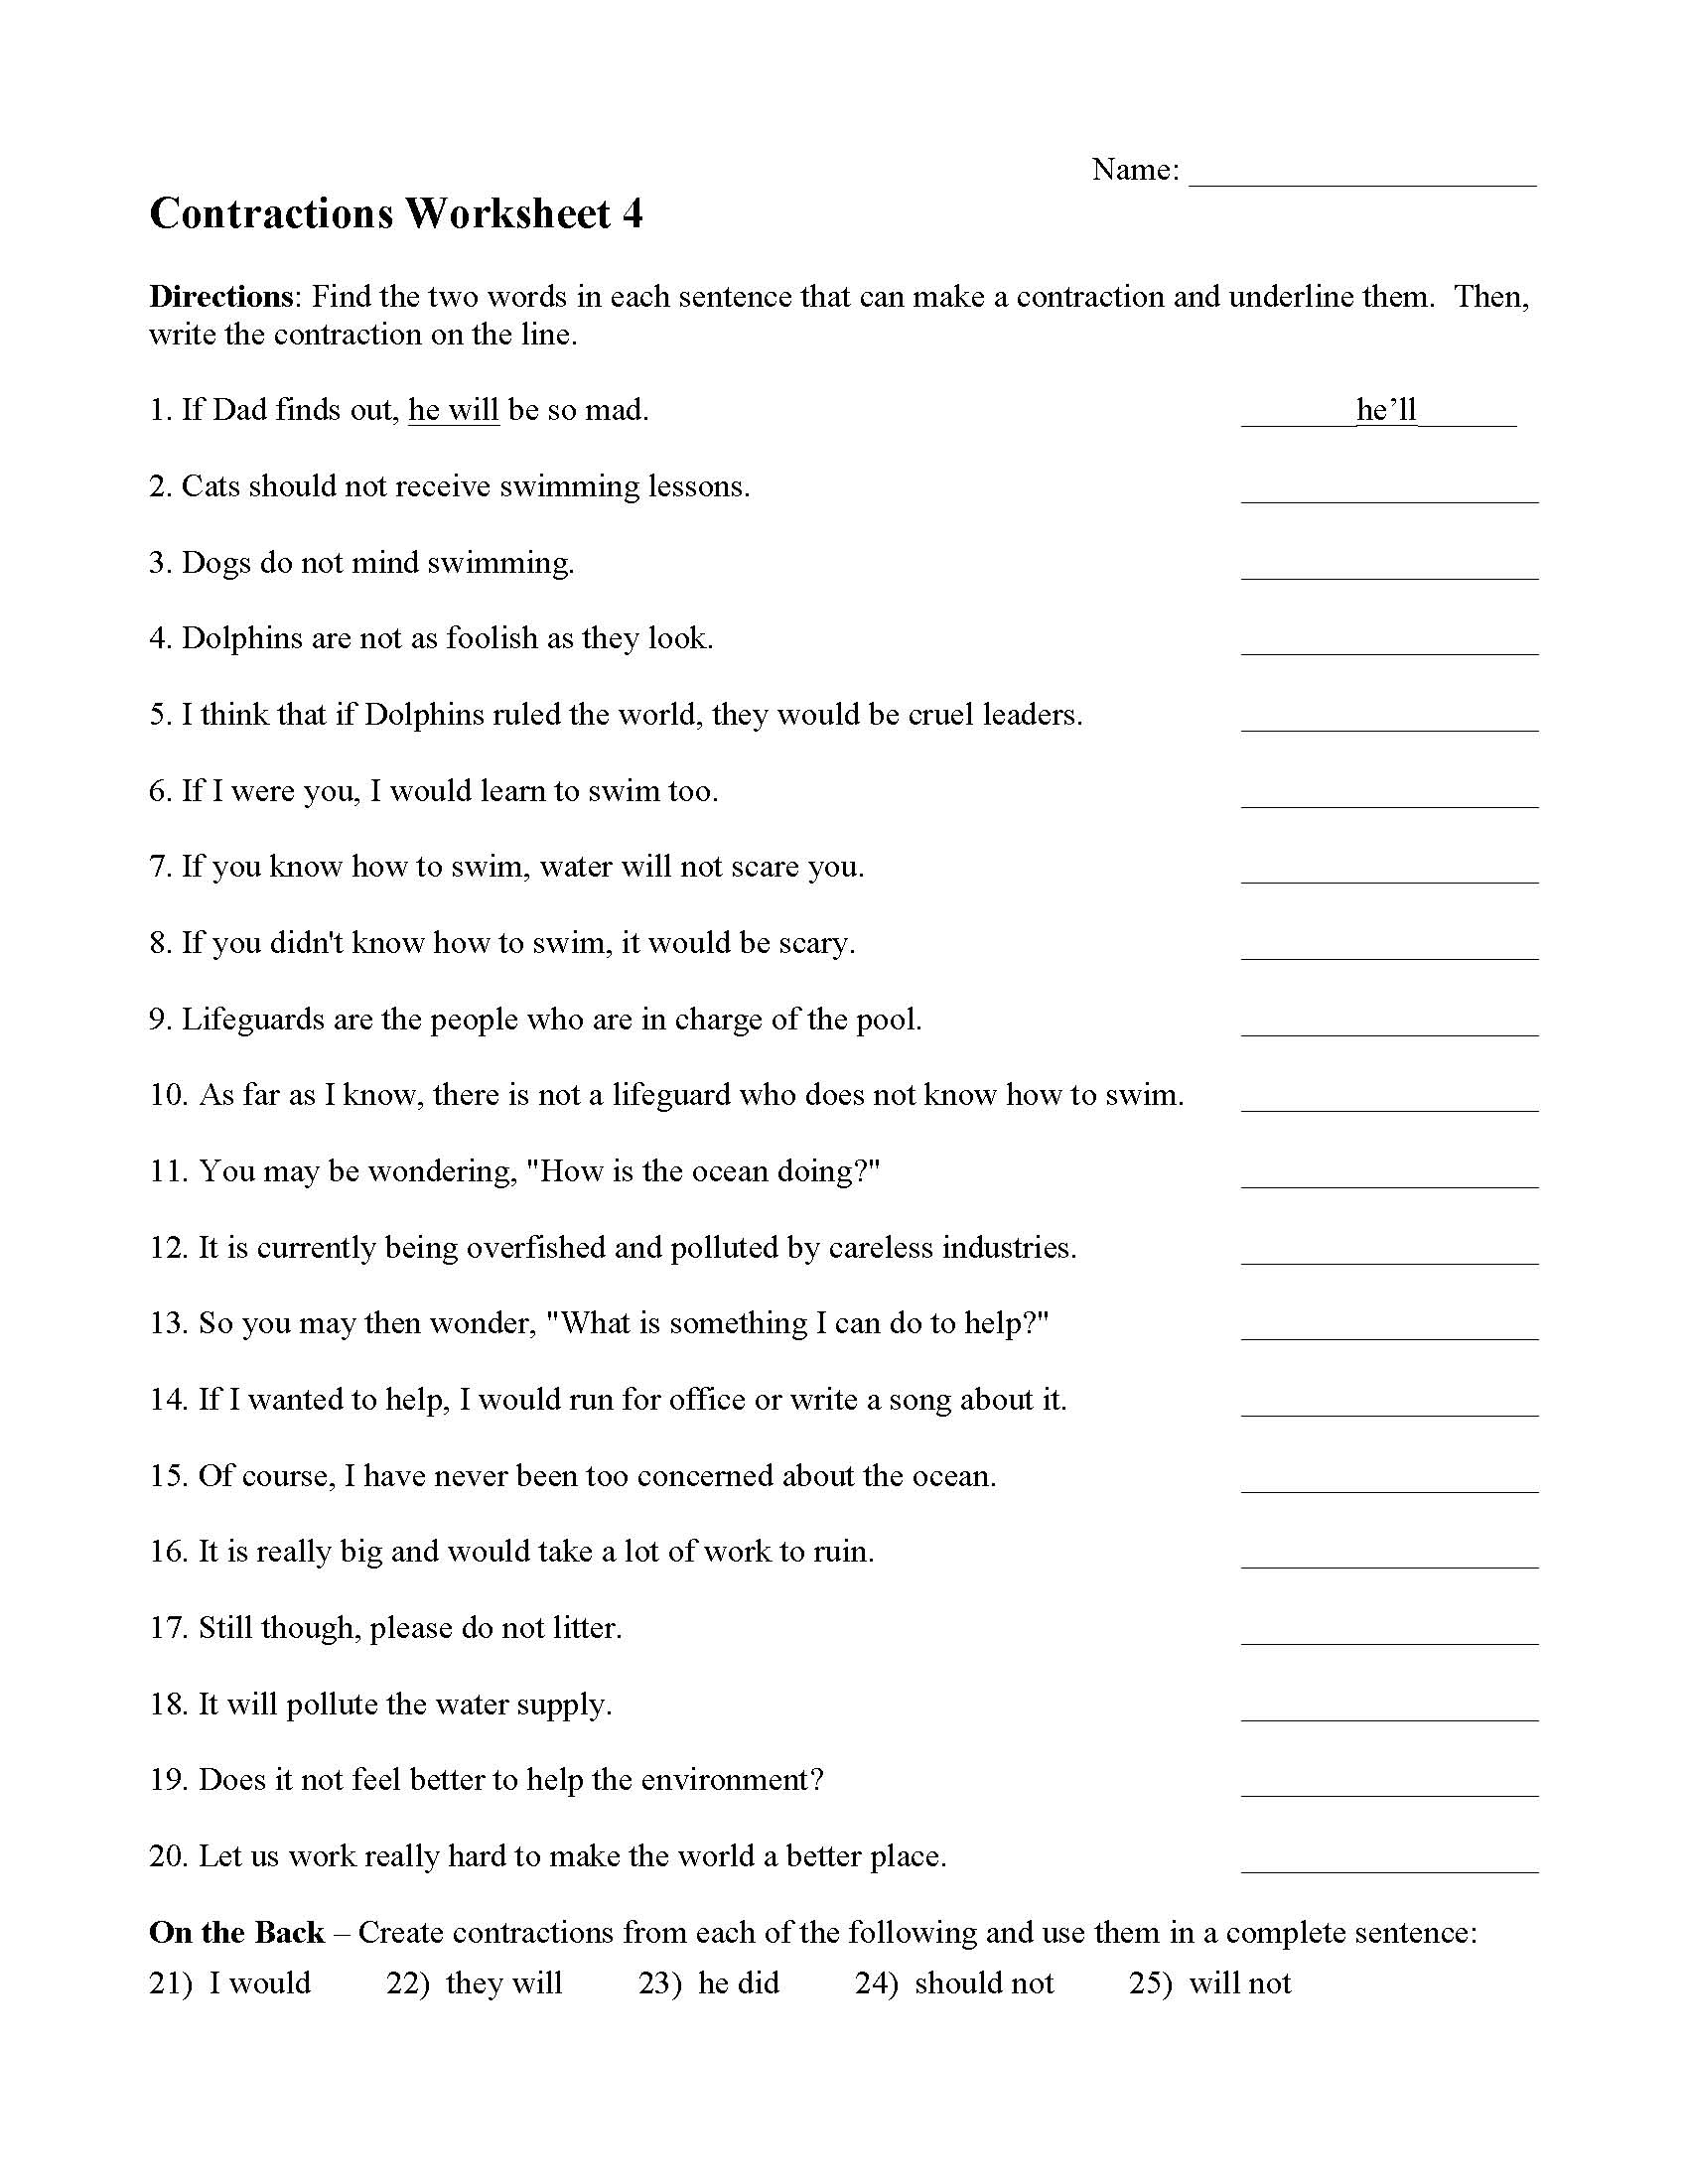 contractions-worksheet-4-preview